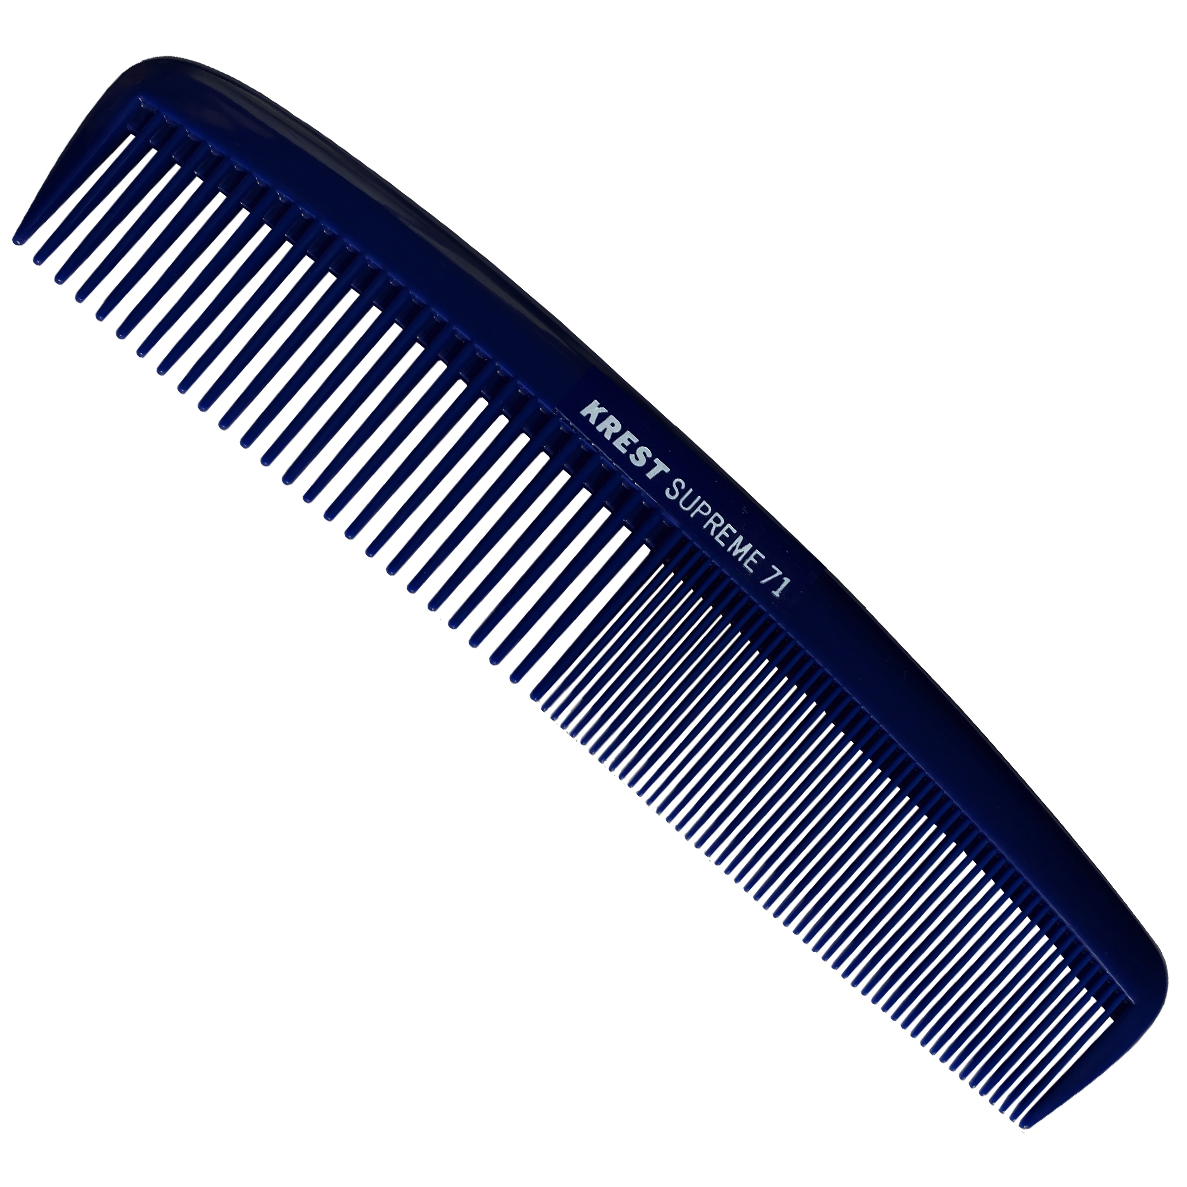 S71 master waver (extra fine tooth) super cutting comb